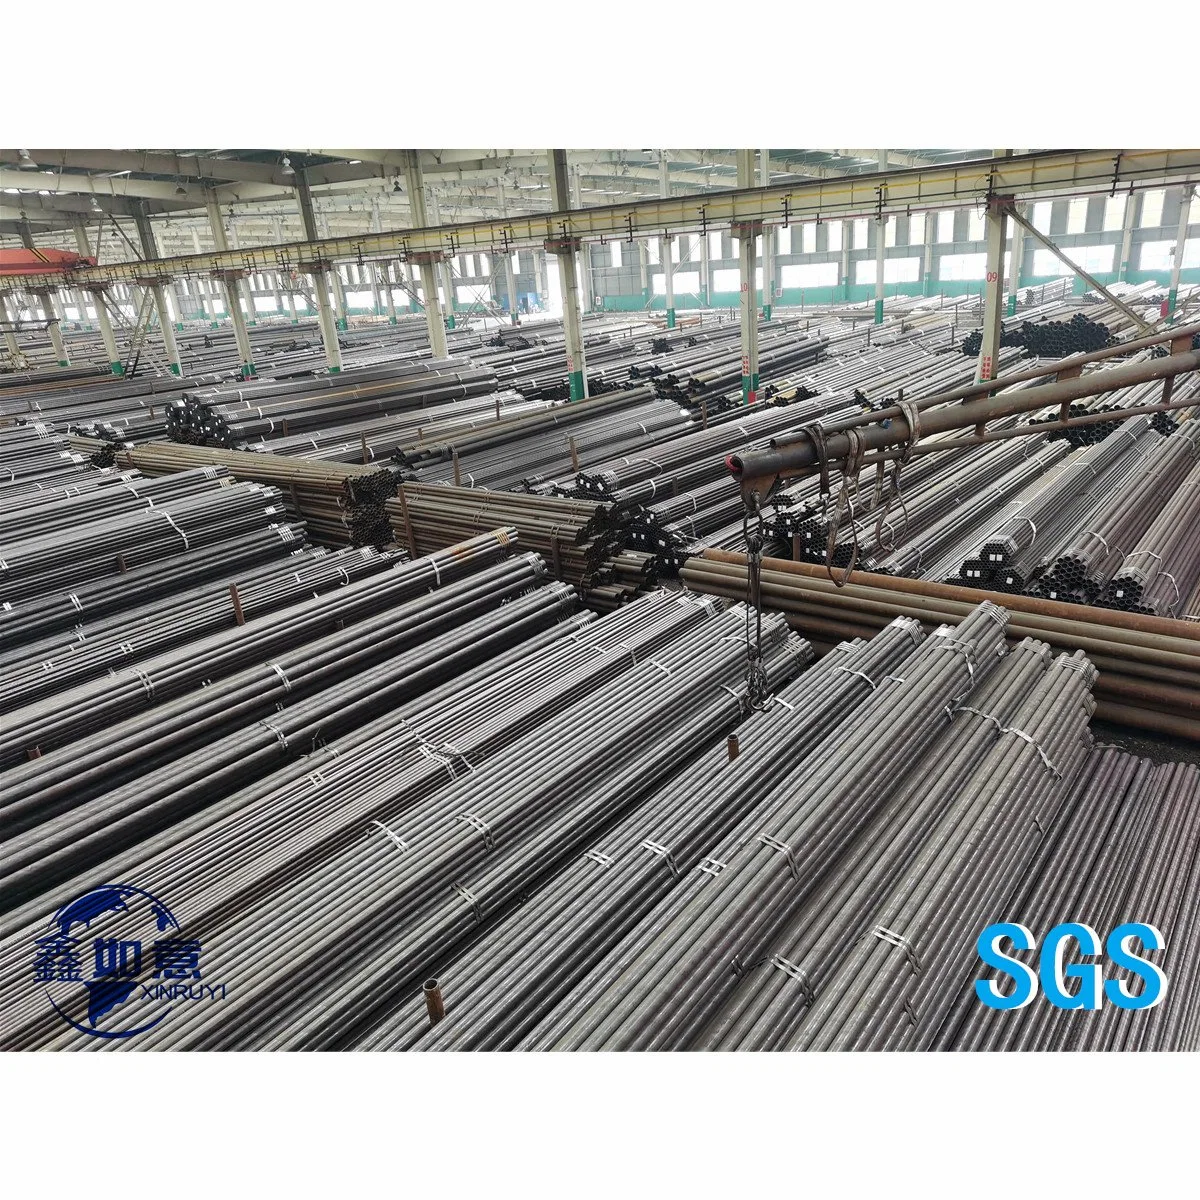 Hot Rolled ASTM 4130 4140 ASME AISI 4340 4330 Alloy Steel Pipe Xinruyi Brand Seamless Steel Pipe